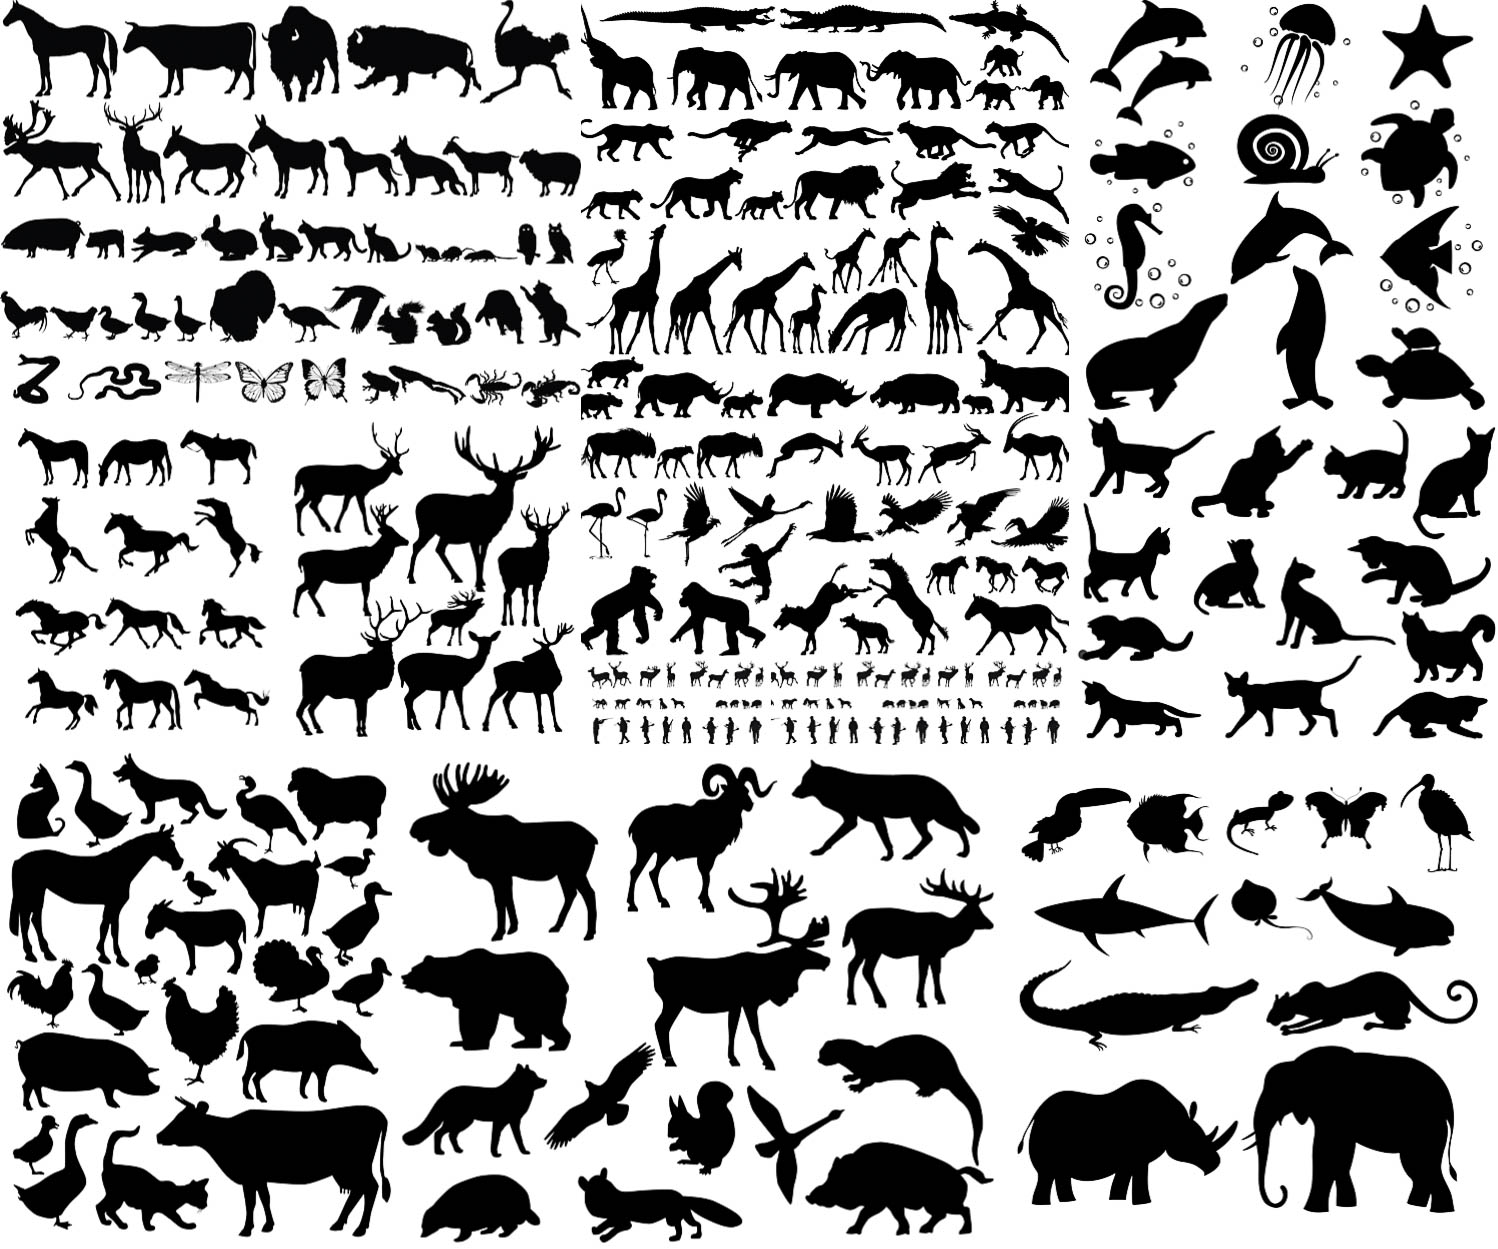 Animals silhouettes large collections vector